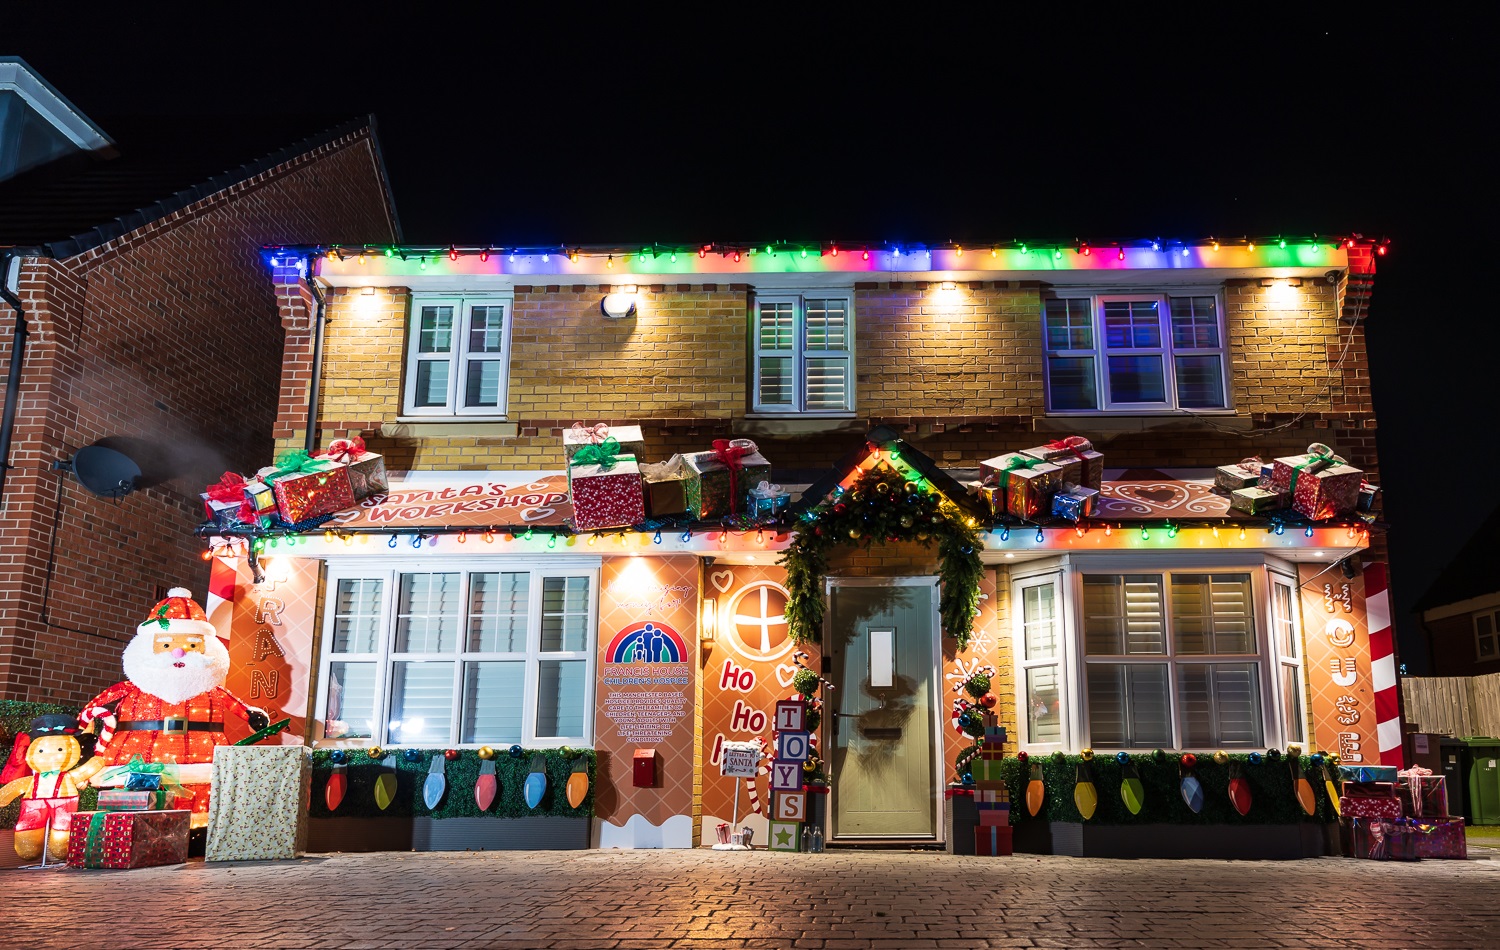 House decorated with Christmas lights and decorations